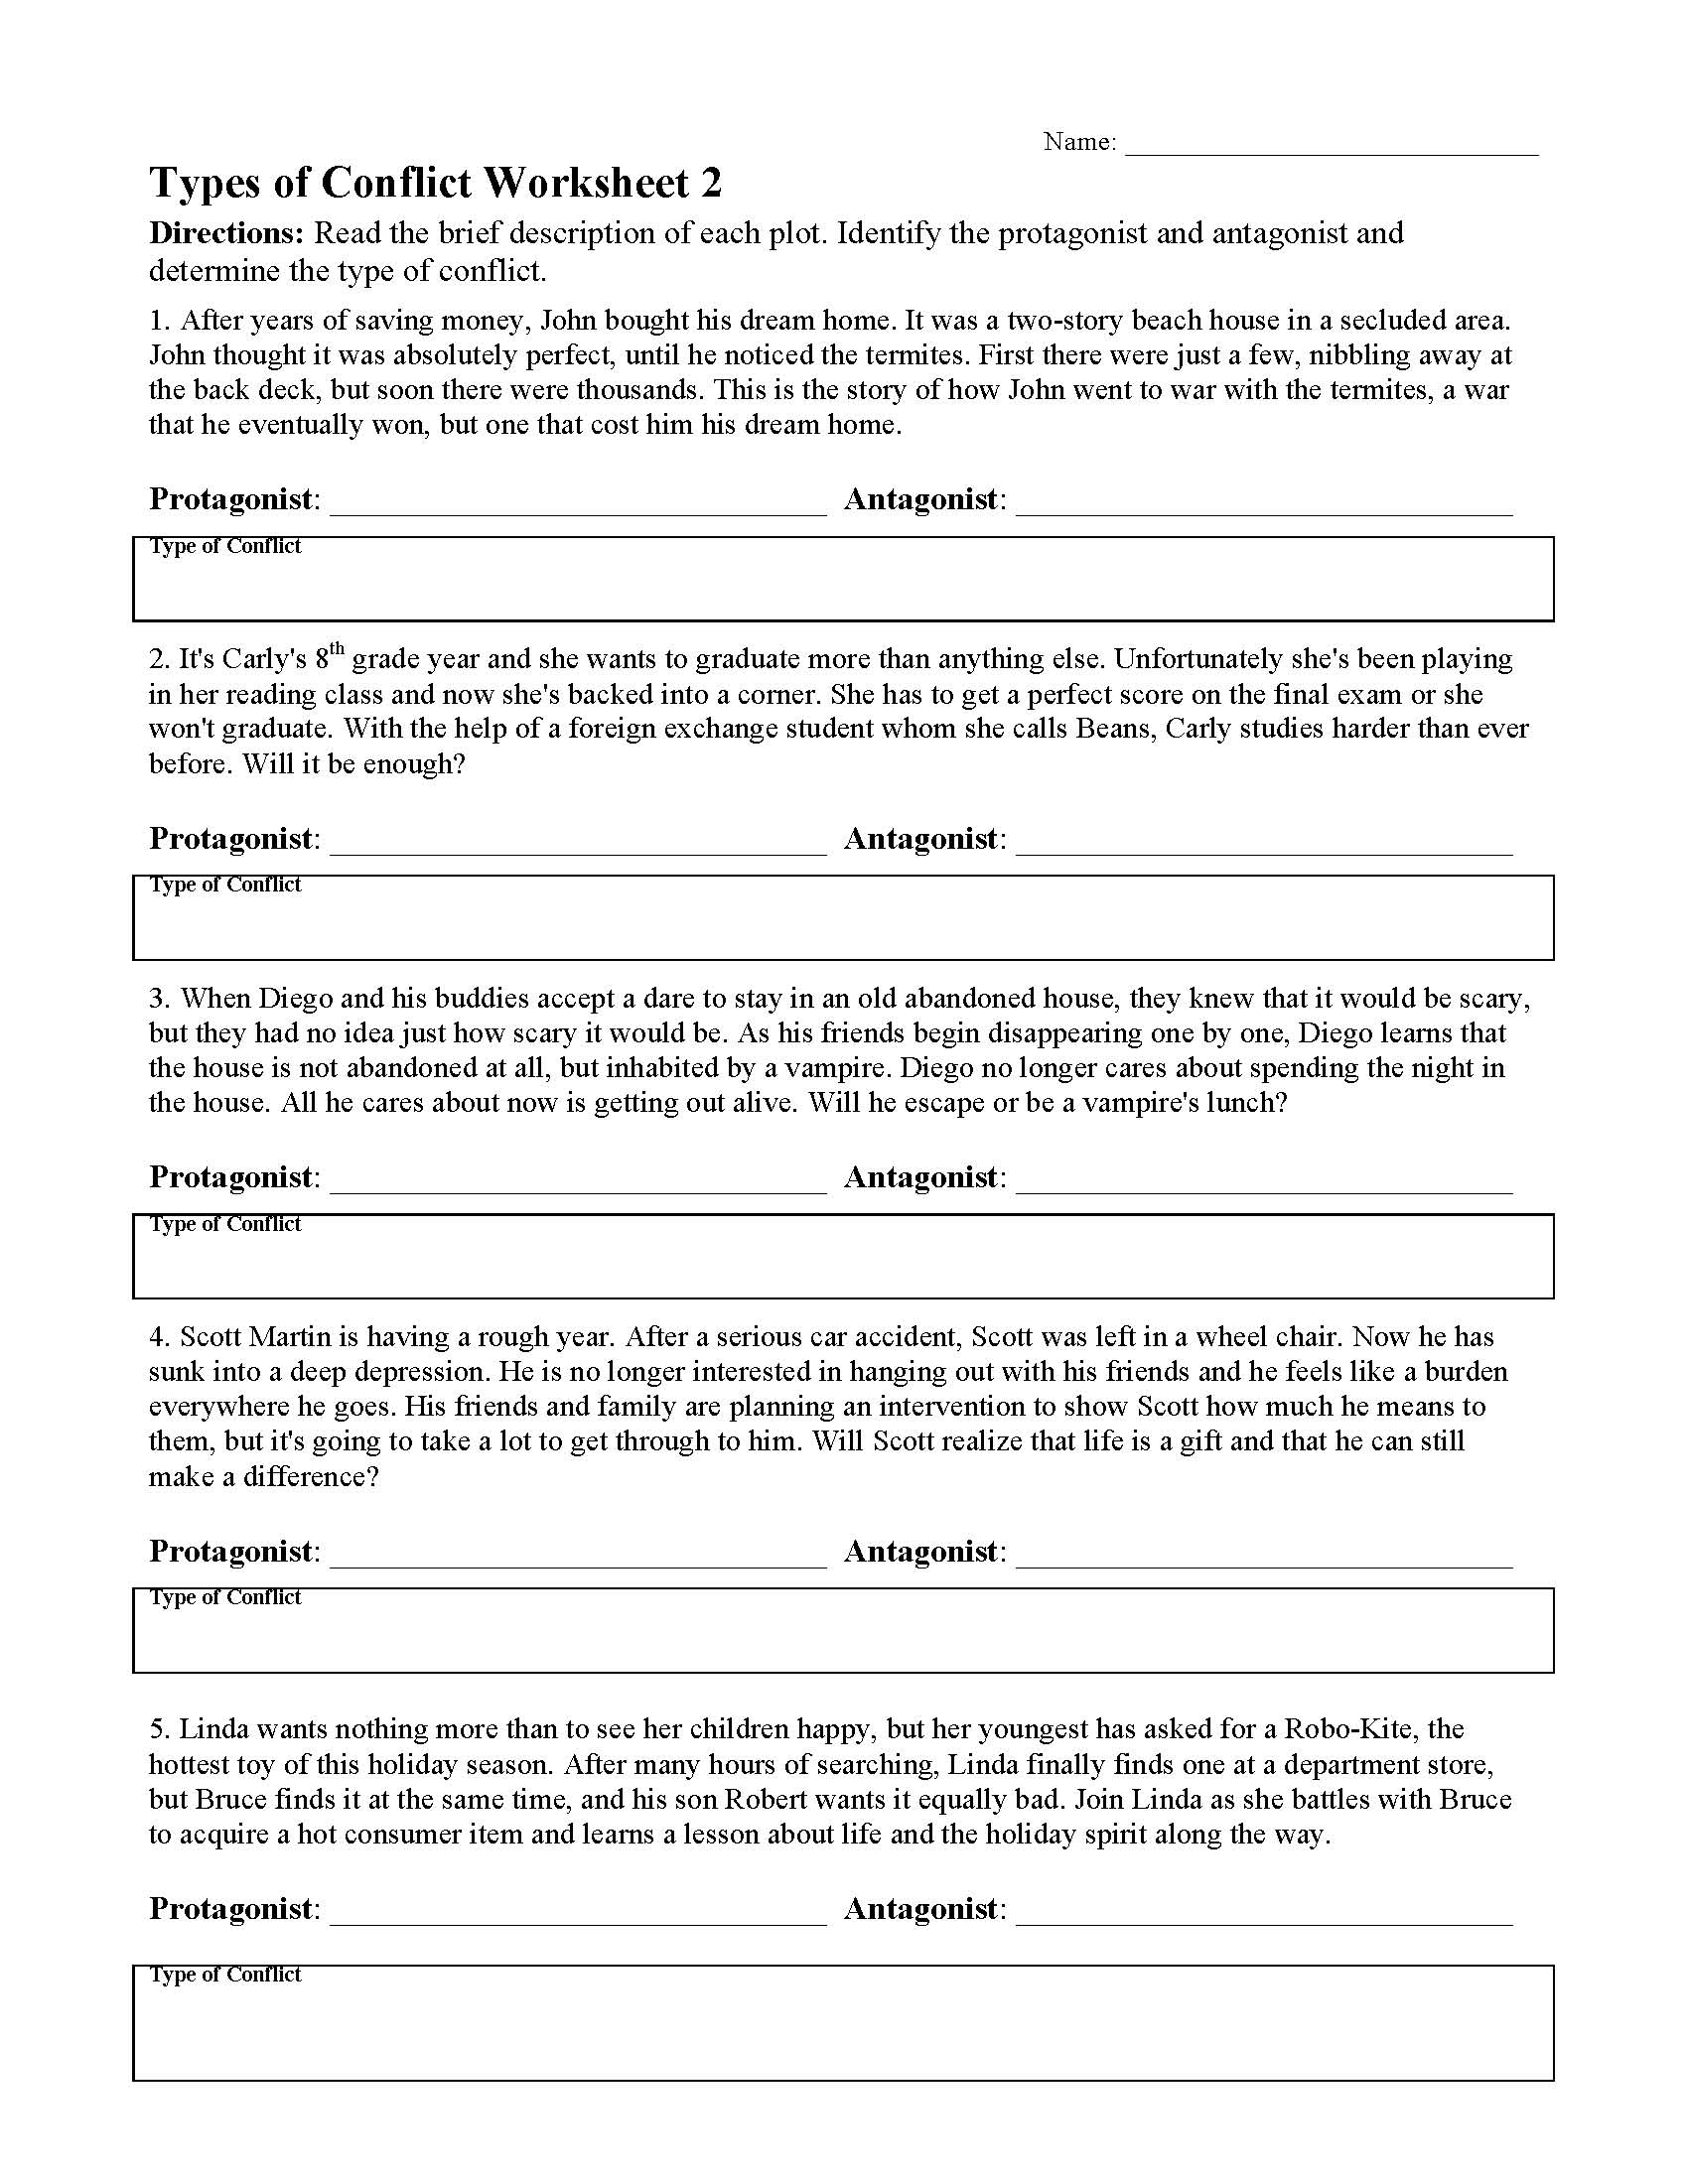 Types of Conflict Worksheet 21  Reading Activity With Regard To Protagonist And Antagonist Worksheet